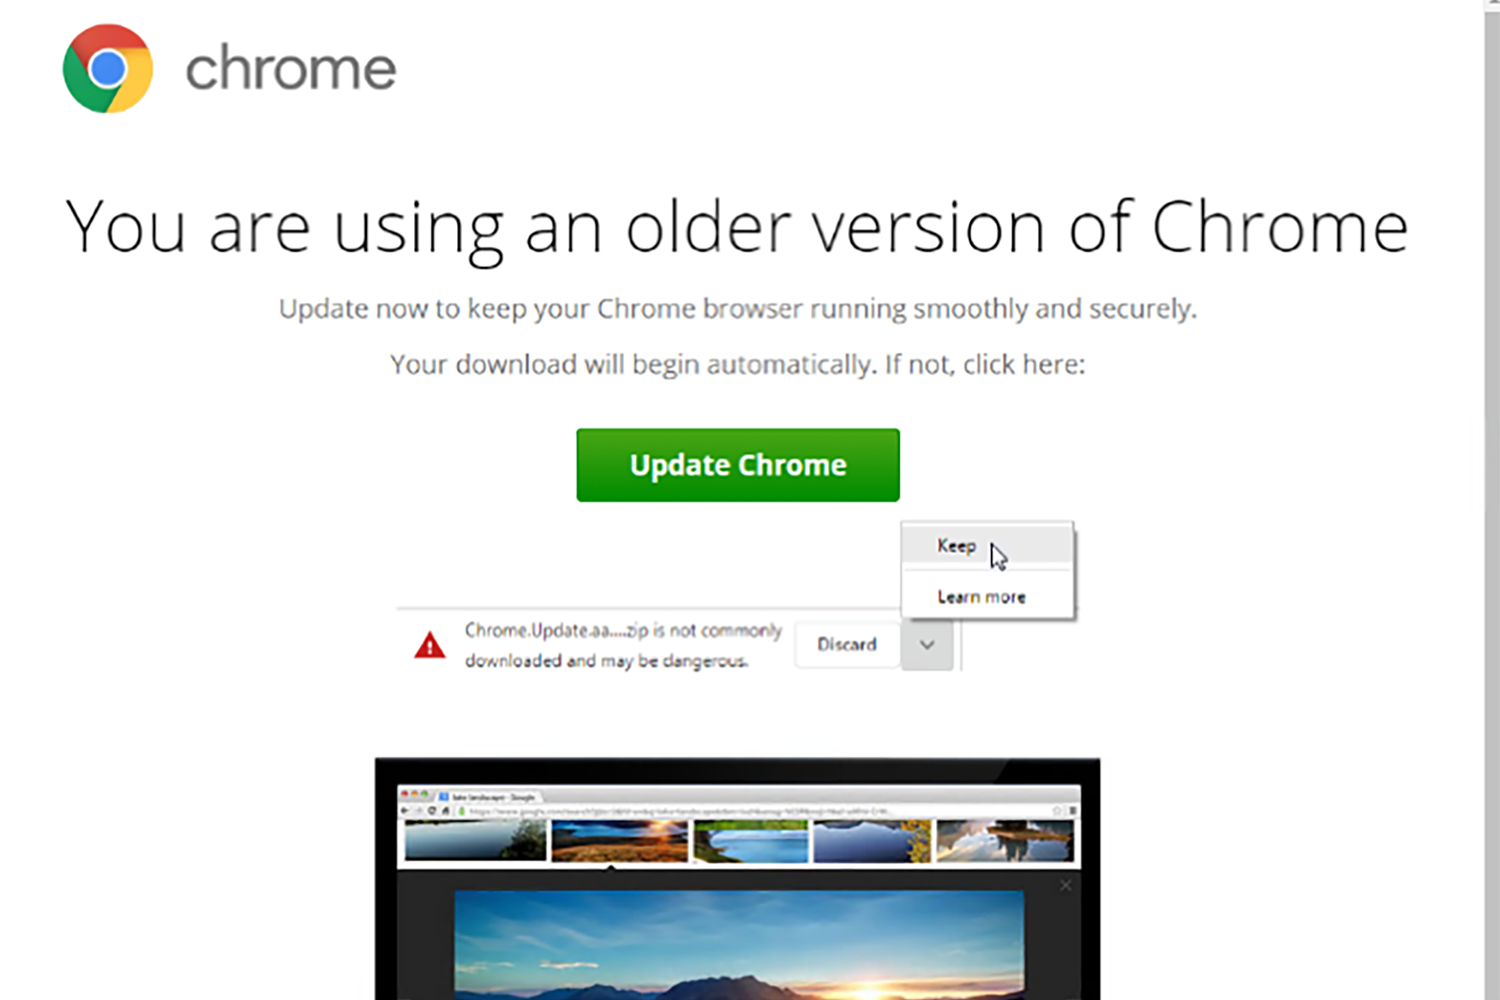 Chromium page. Chrome update. Chrome face. Chromium Updater. Proofpoint.